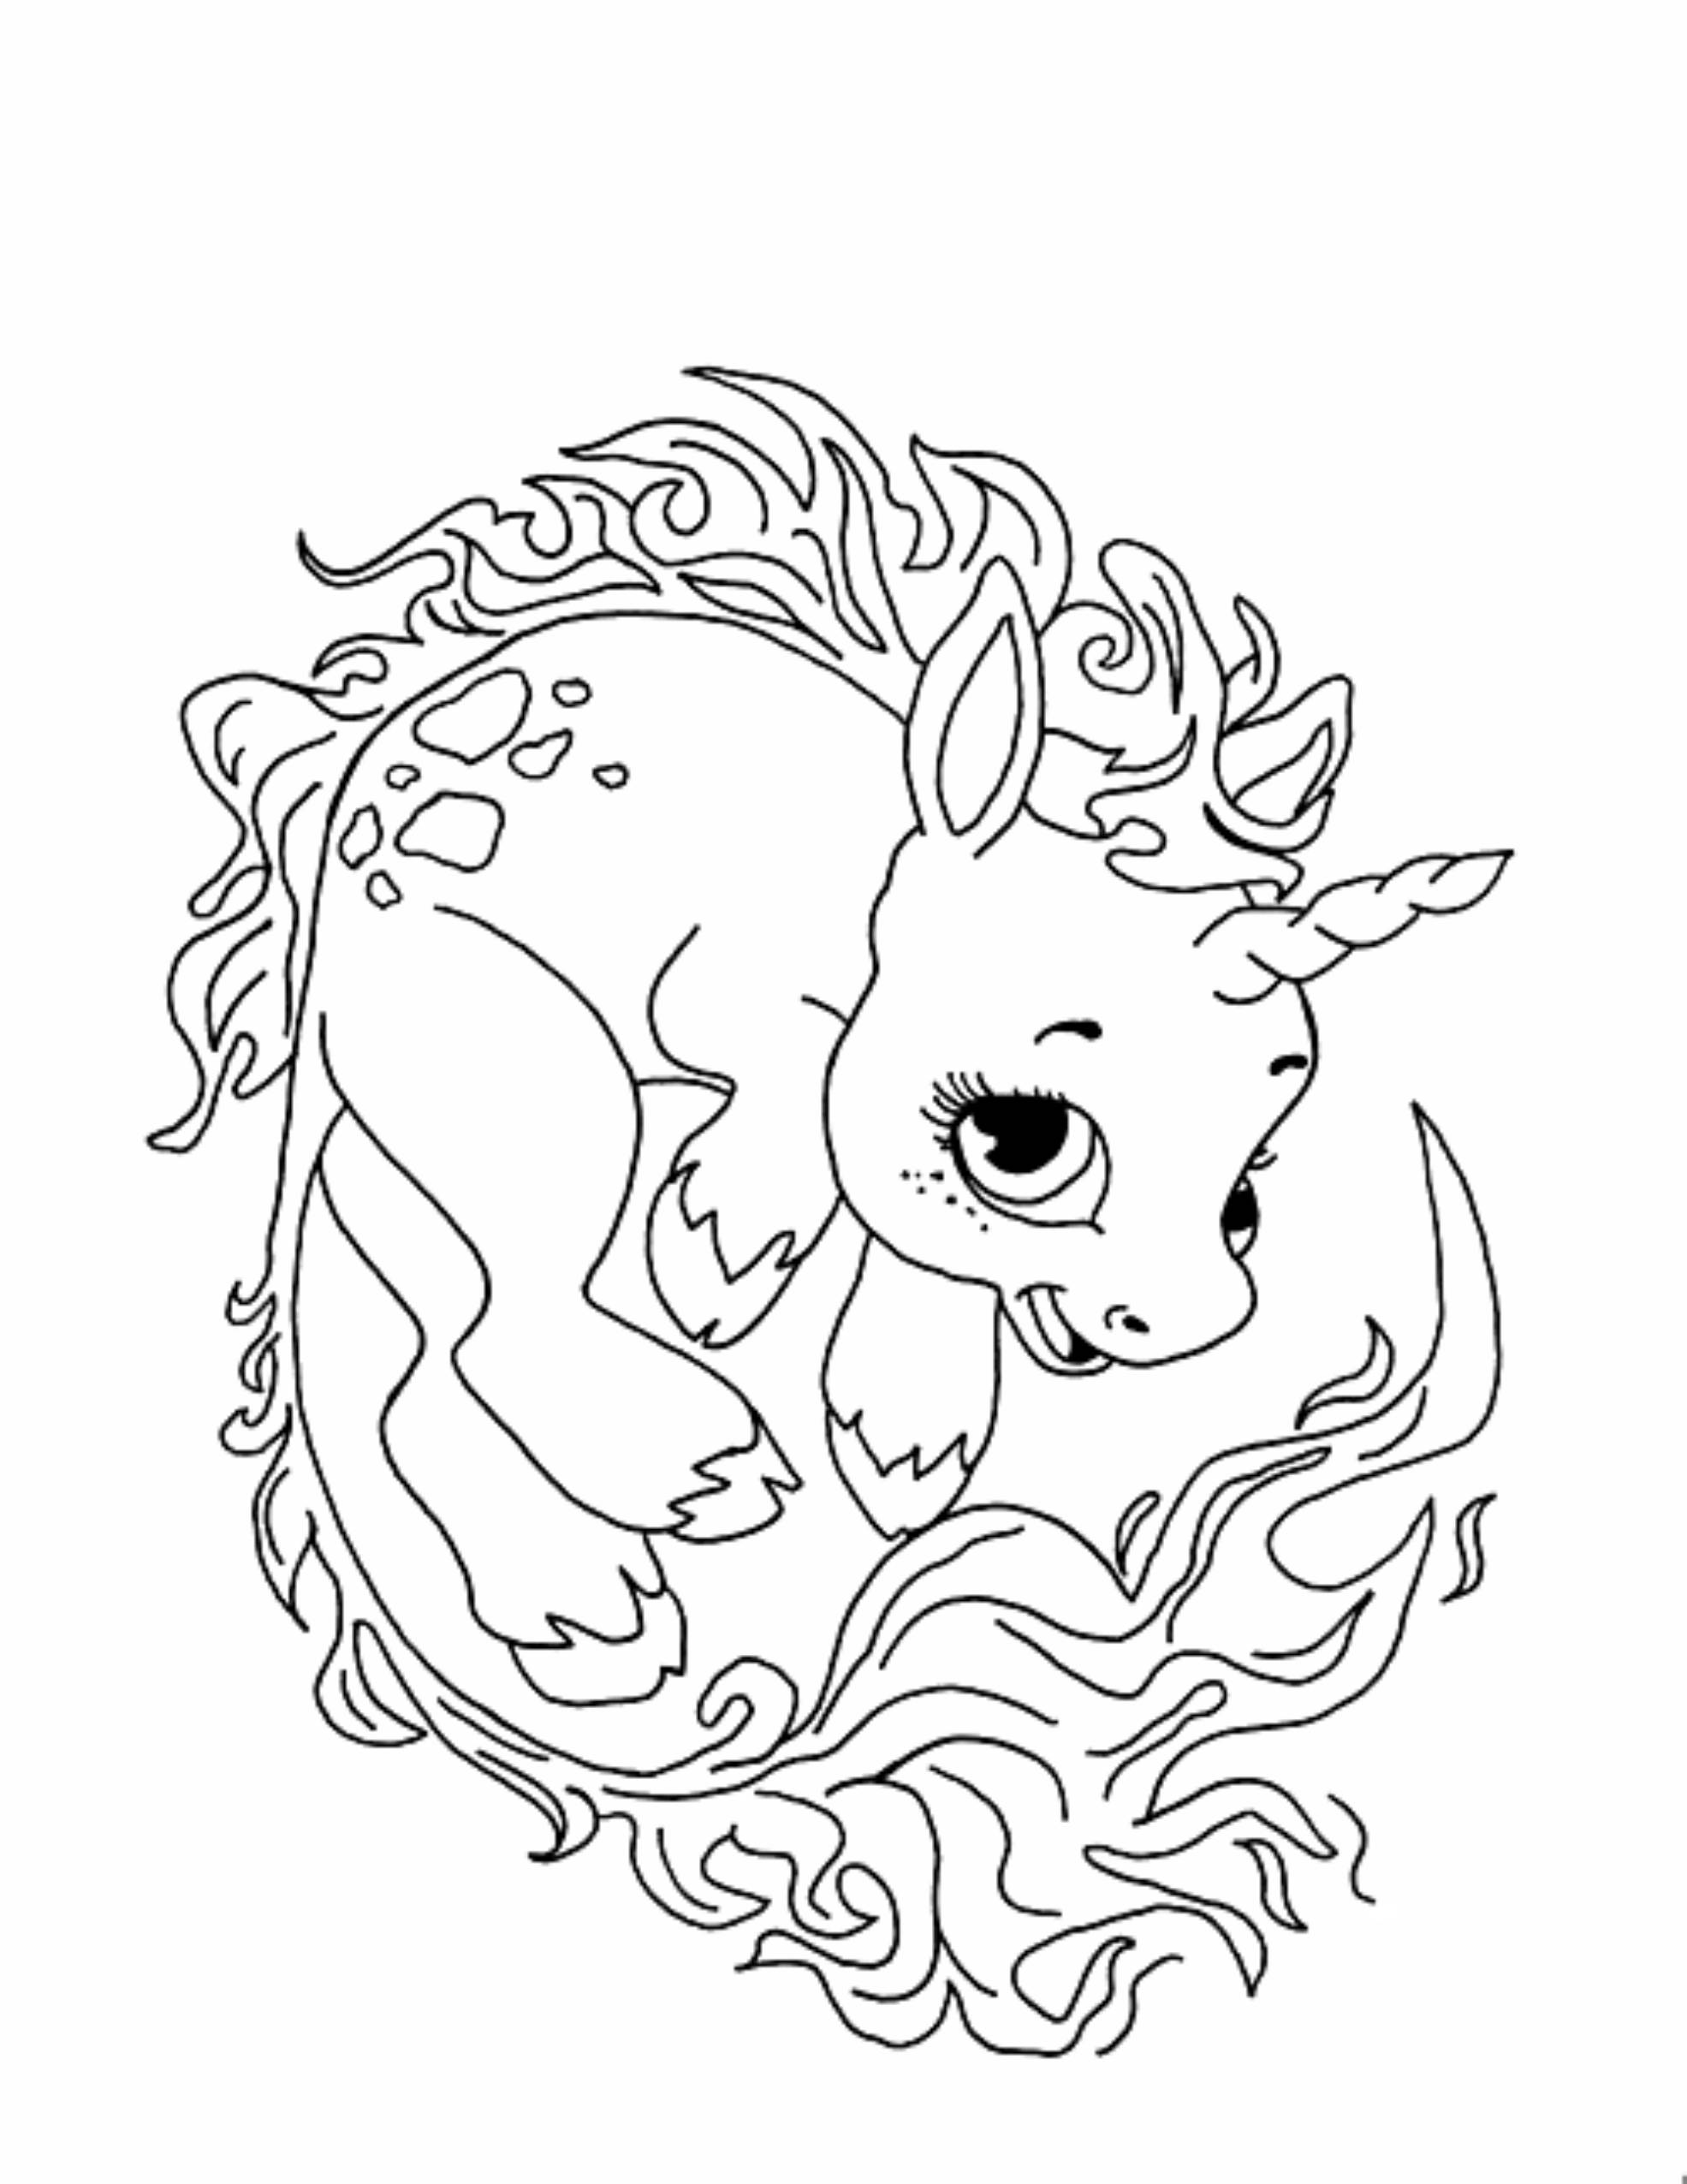 Free Printable Unicorn Coloring Page Download Free Clip Art Free Clip Art On Clipart Library